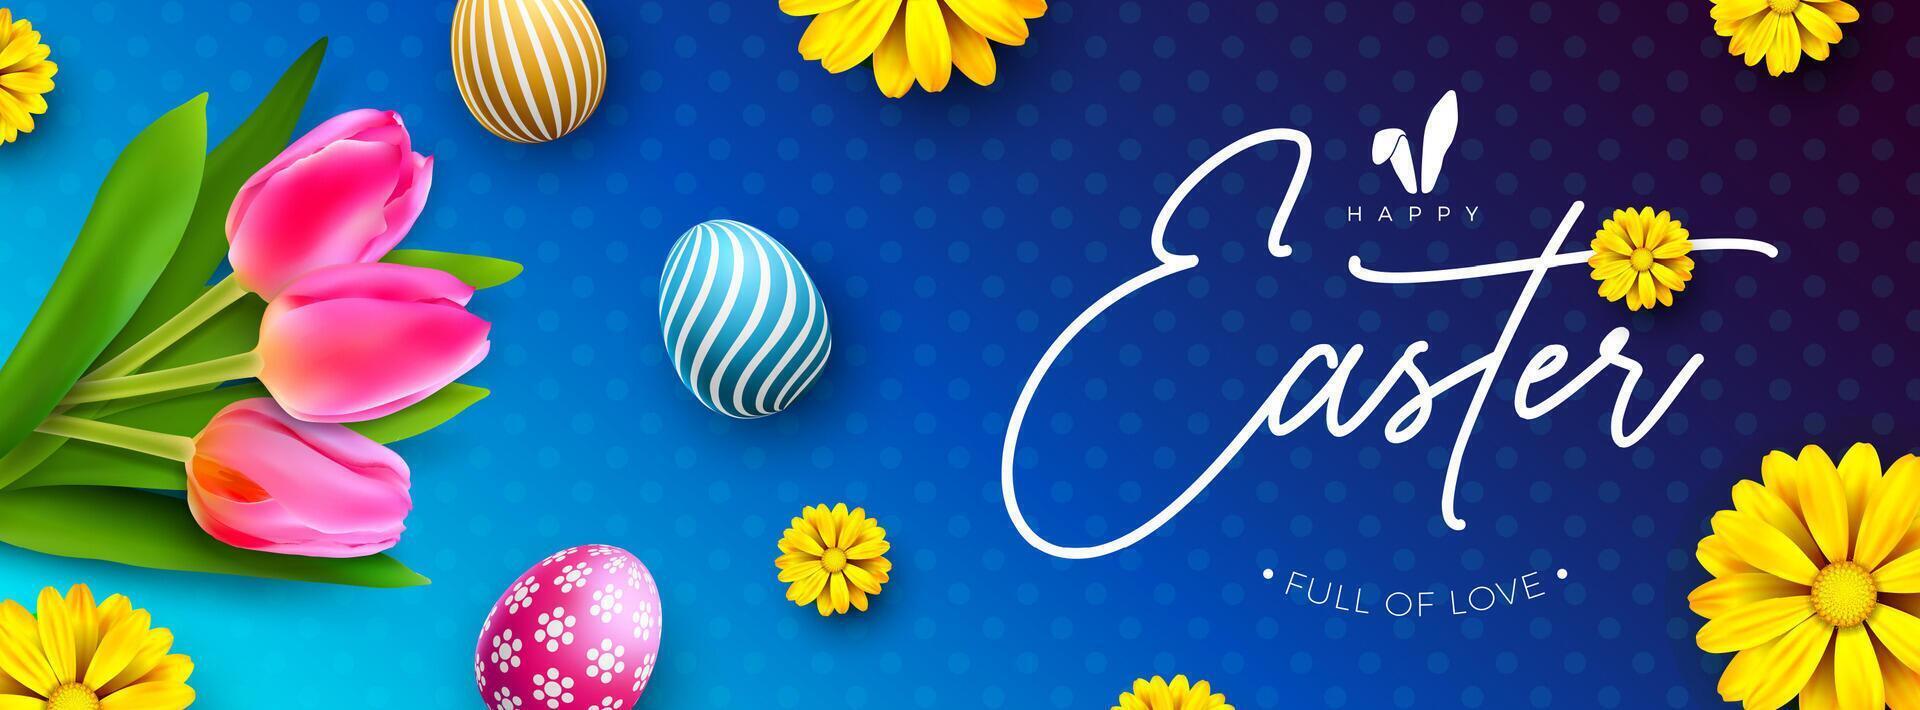 Happy Easter Holiday Design with Painted Egg and Spring Tulip Flower on Violet Blue Background. International Religious Vector Celebration Banner Illustration with Typography Lettering for Greeting